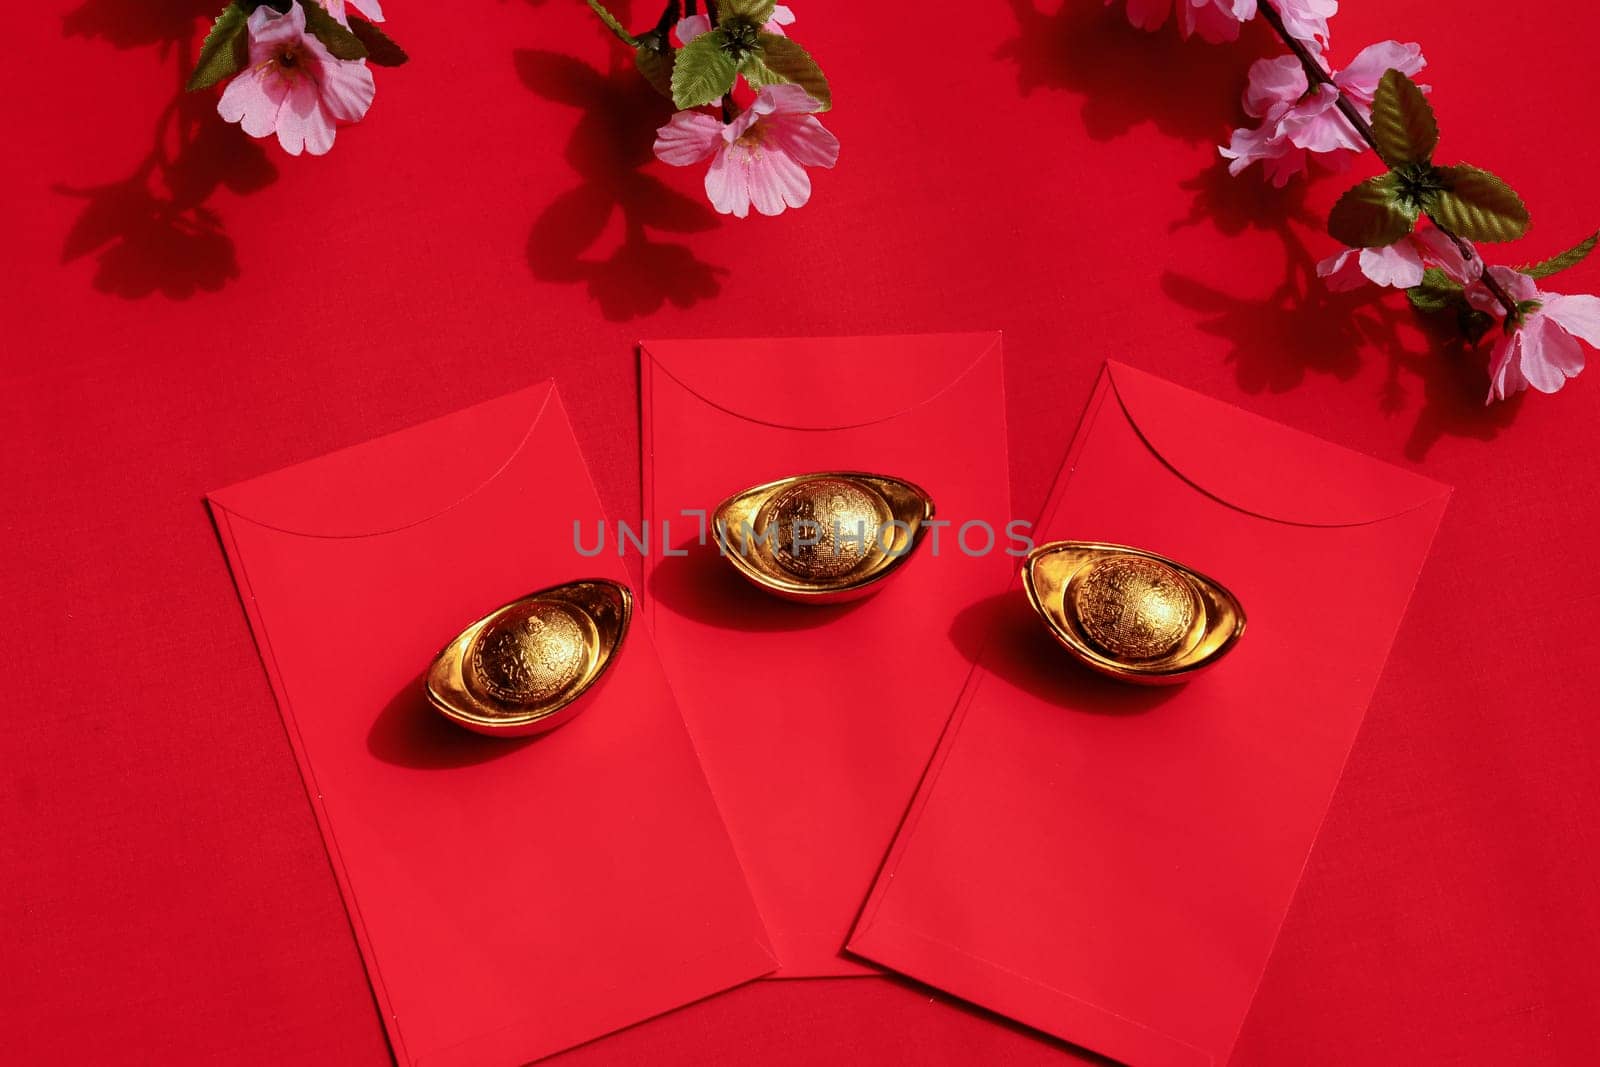 Chinese New Year Spring festival decorations red packet and gold ingots. by JennMiranda